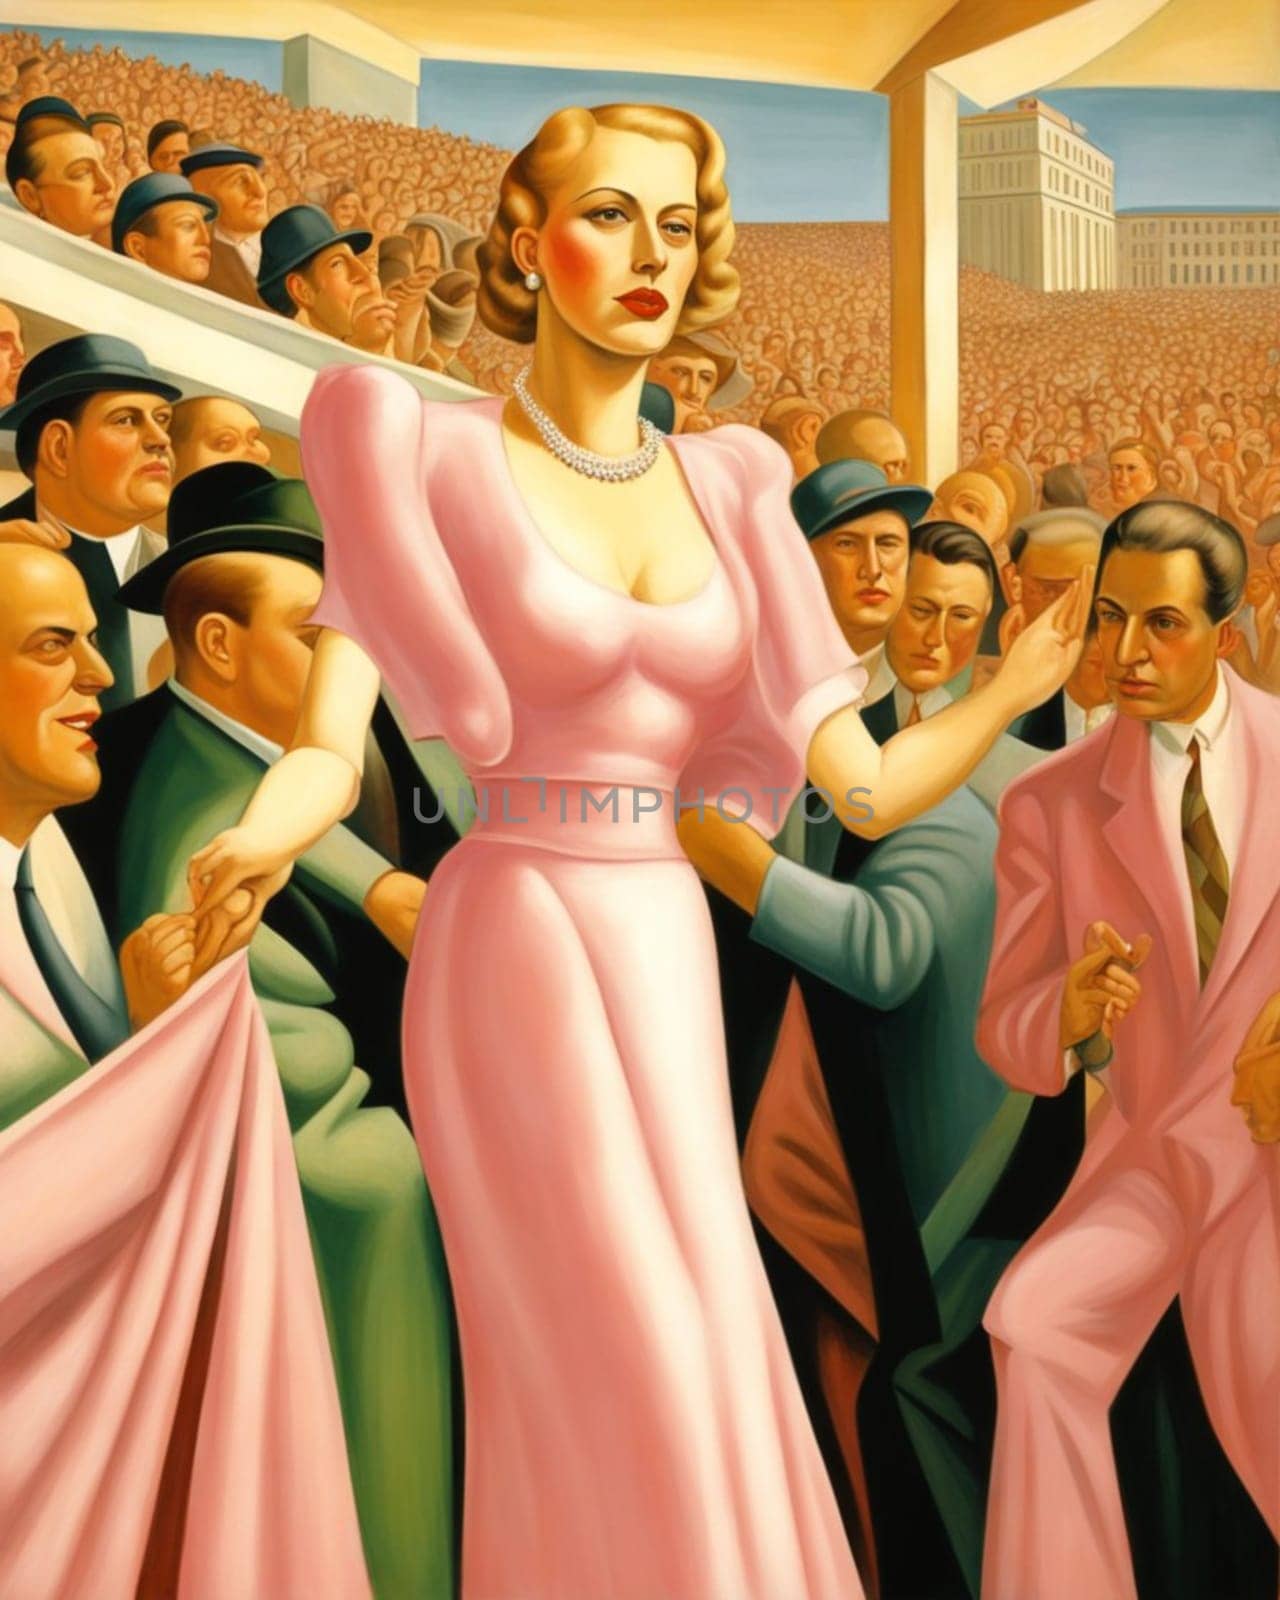 Figure of a woman like Evita Peron, short hairstyle, blond, thin, energetic, art deco style, speaking pitching poor people rights shouting crowd from pink house terrace, Buenos Aires, Argentina